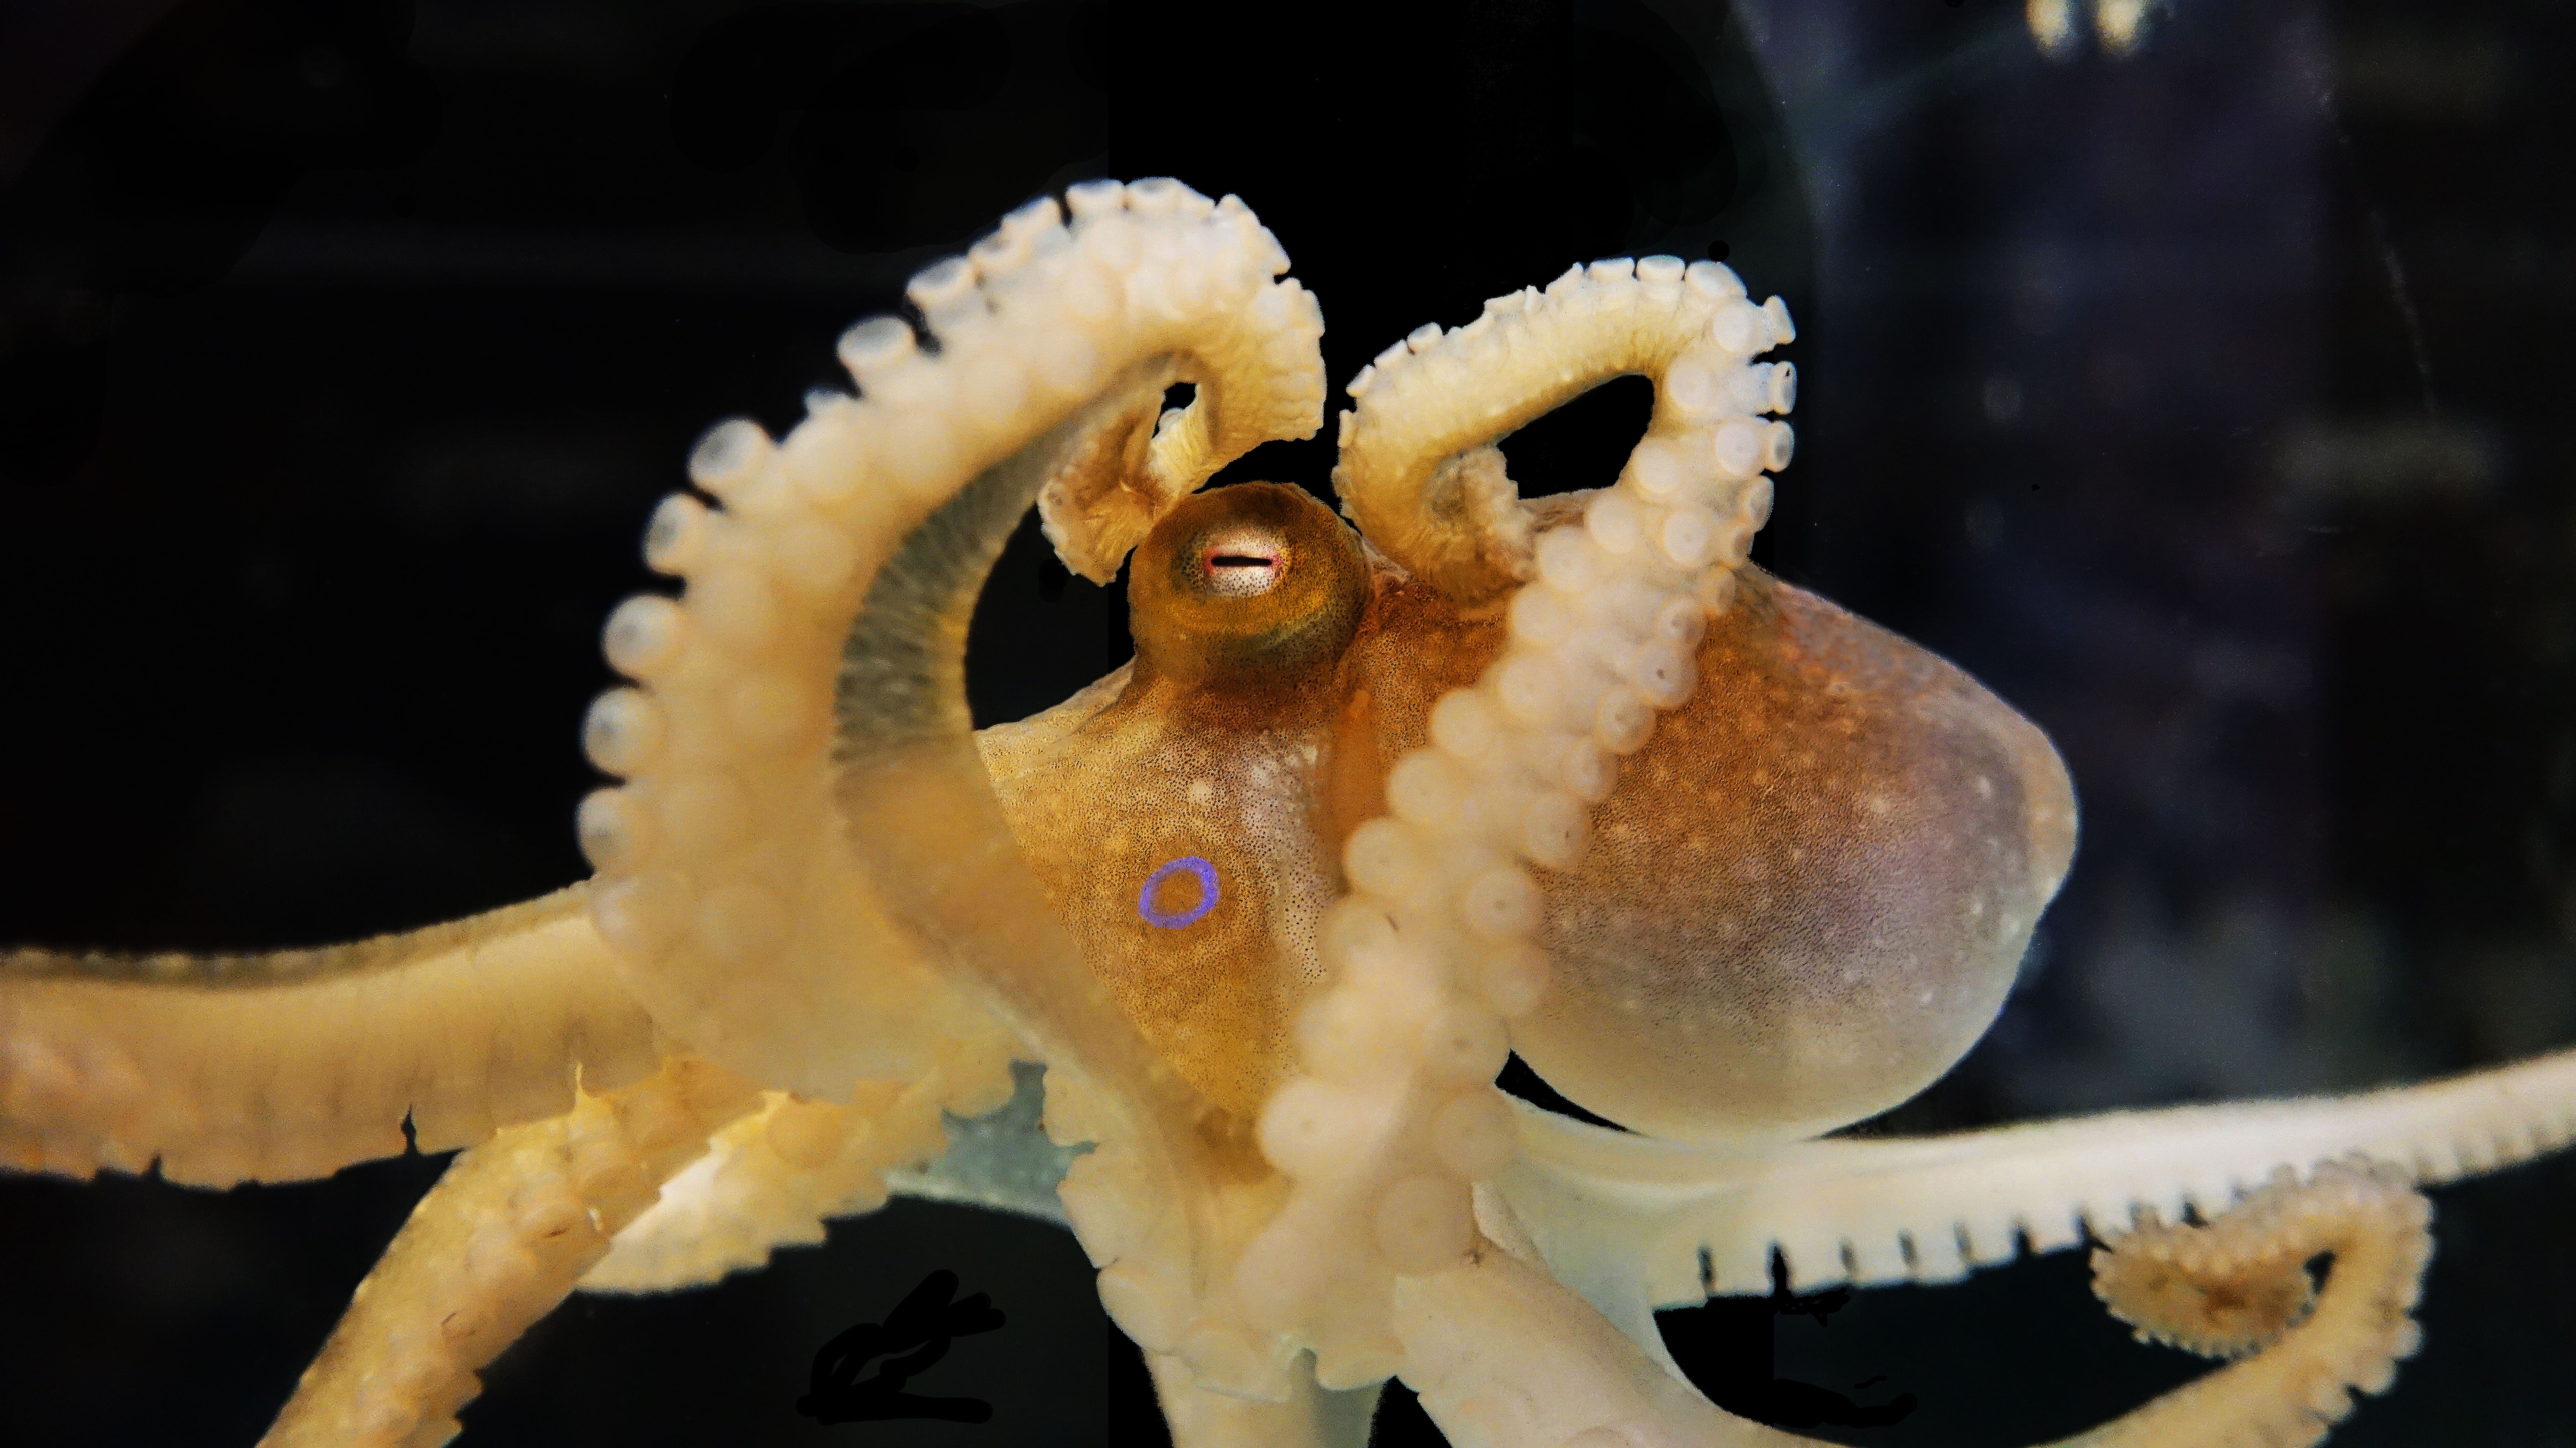 Octopus bimaculoides, also known as the Californian two-spot octopus